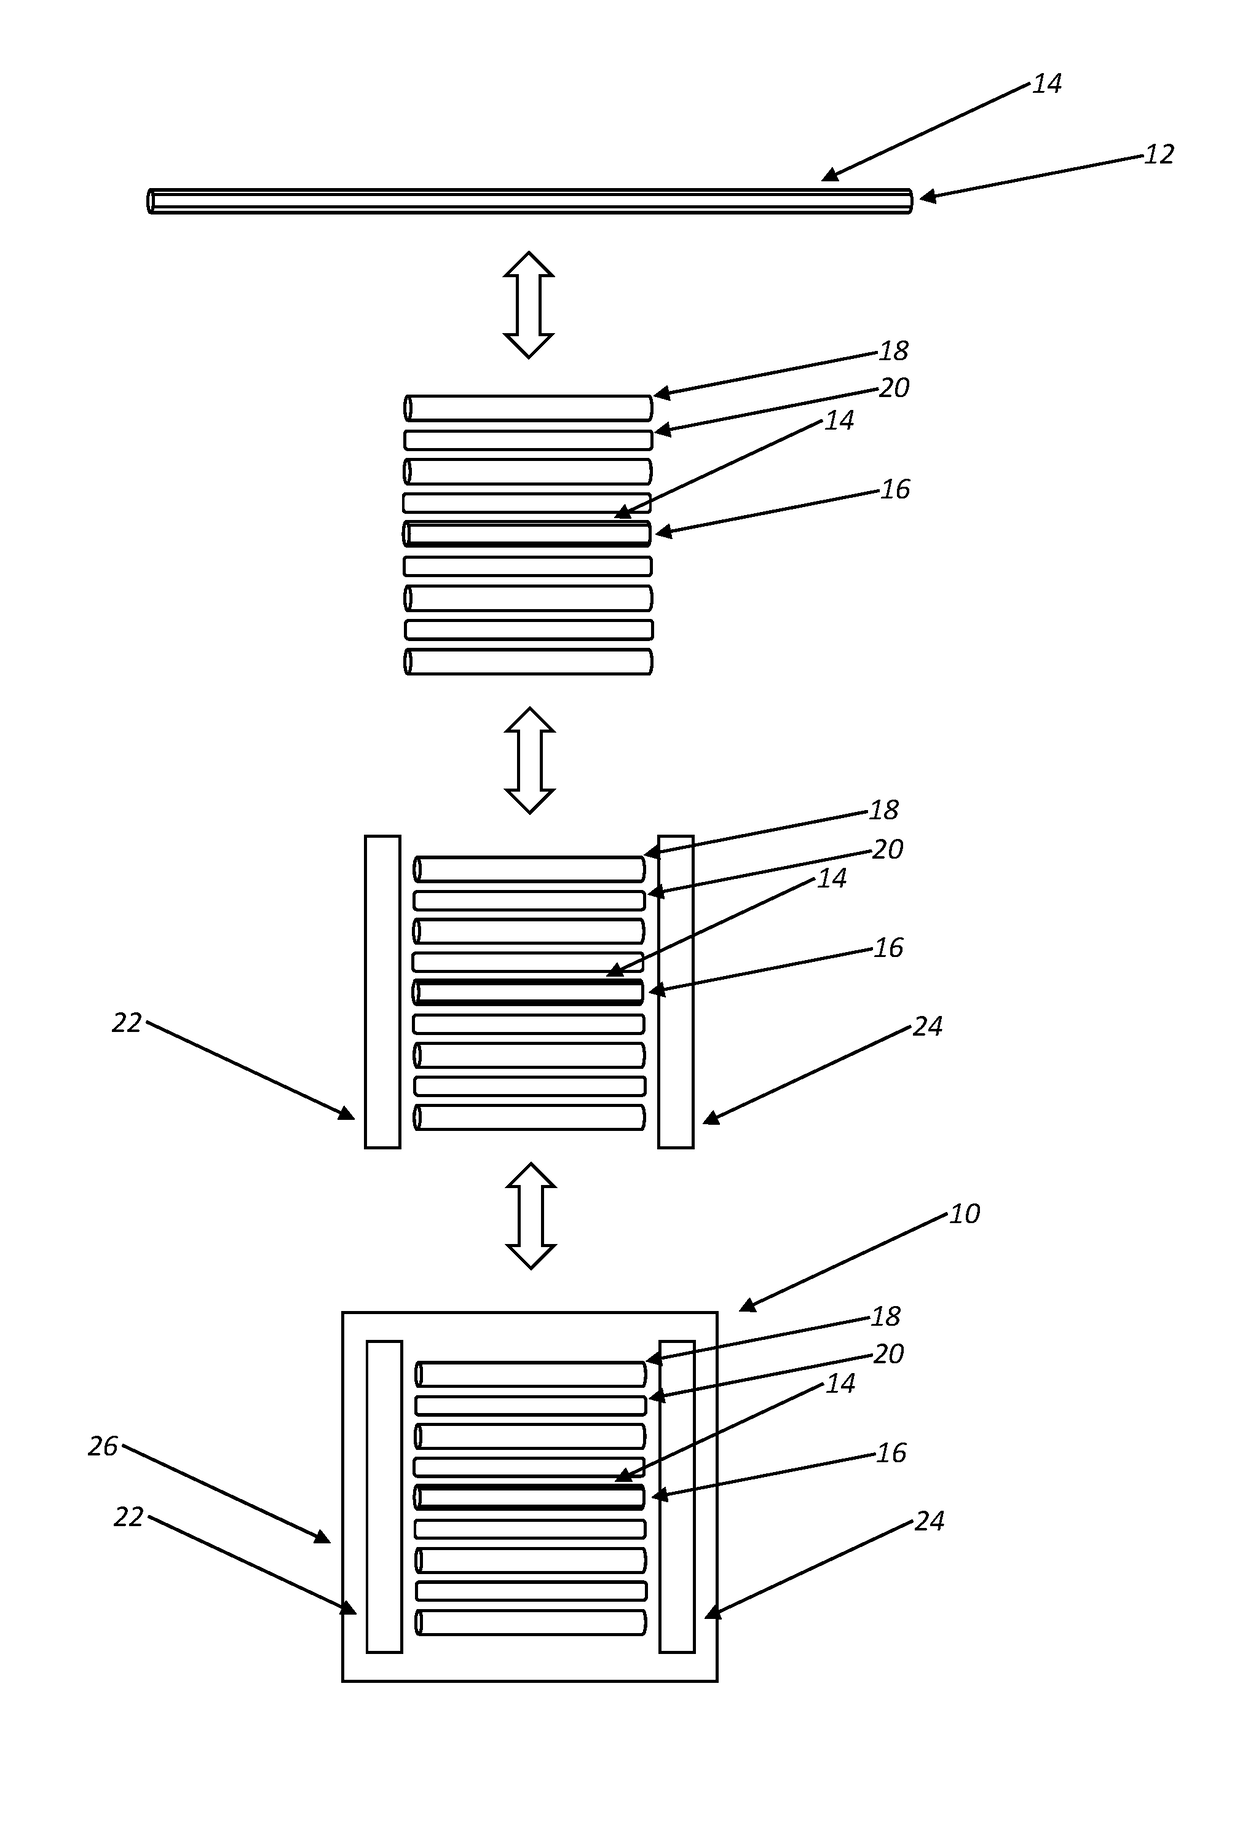 Scintillator based fiber optic plate for neutron imaging applications and the like